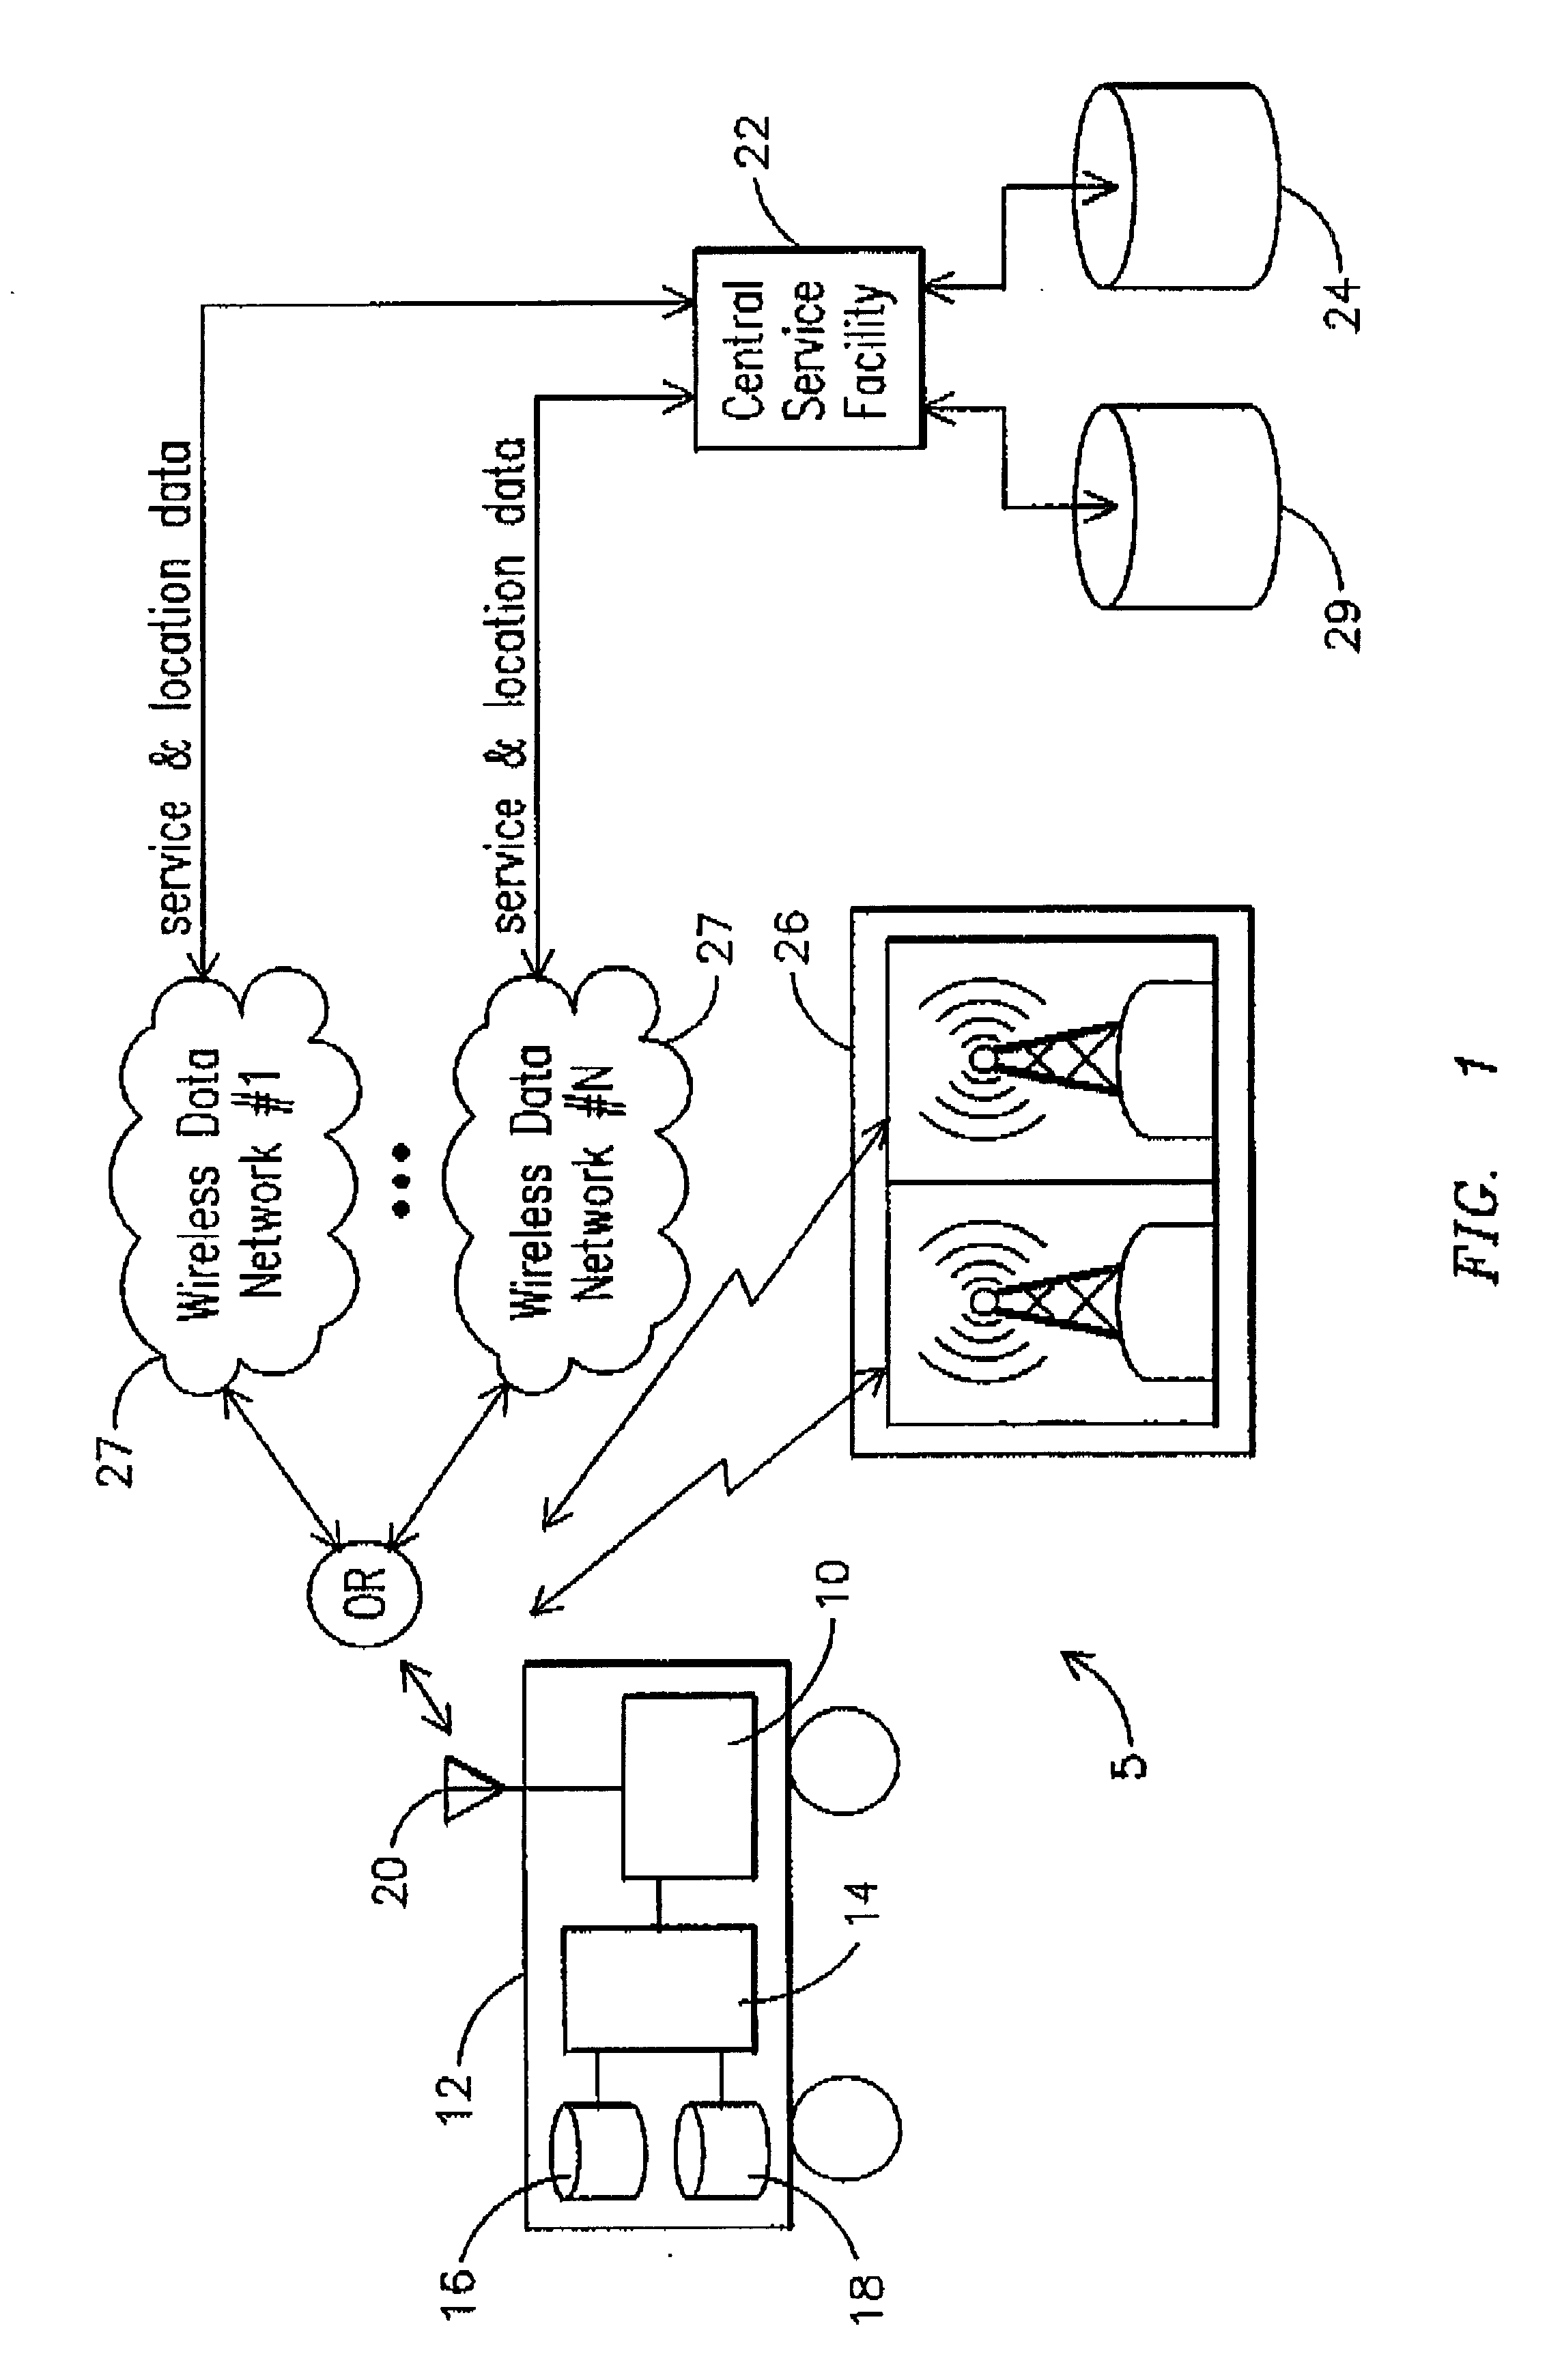 Wireless communication with a mobile asset employing dynamic configuration of a software defined radio